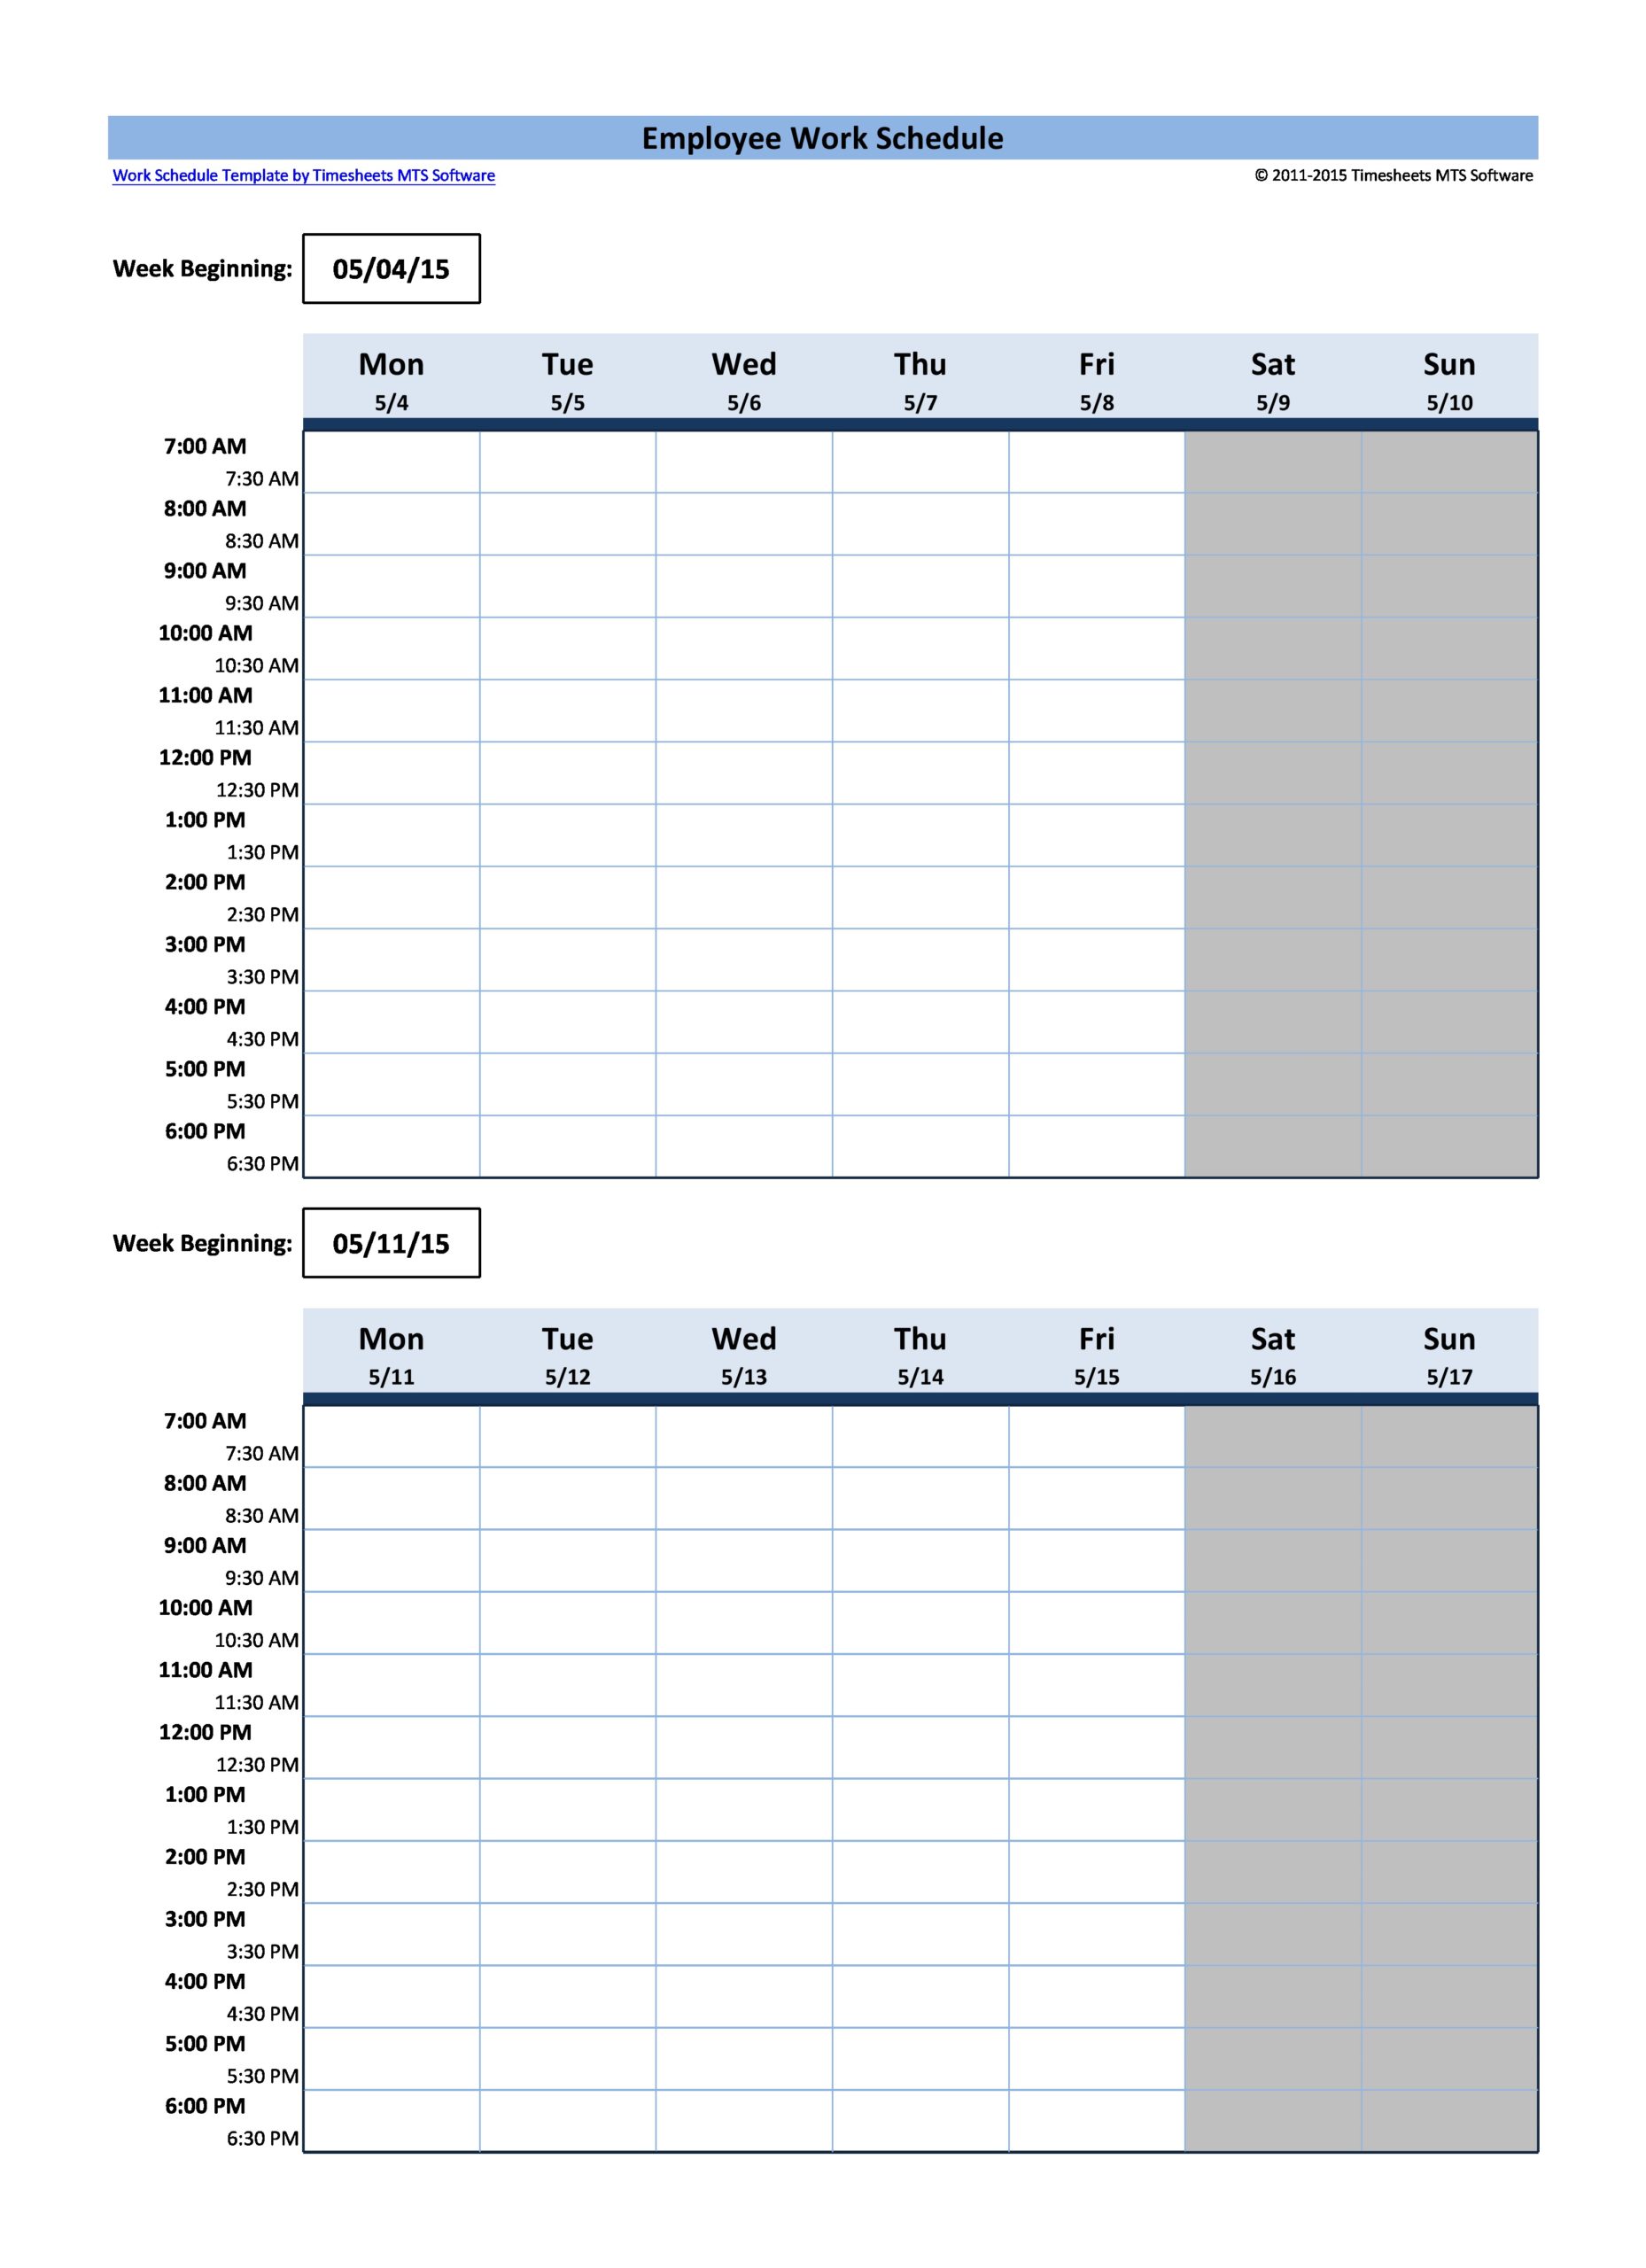 40-free-employee-schedule-templates-excel-word-templatelab